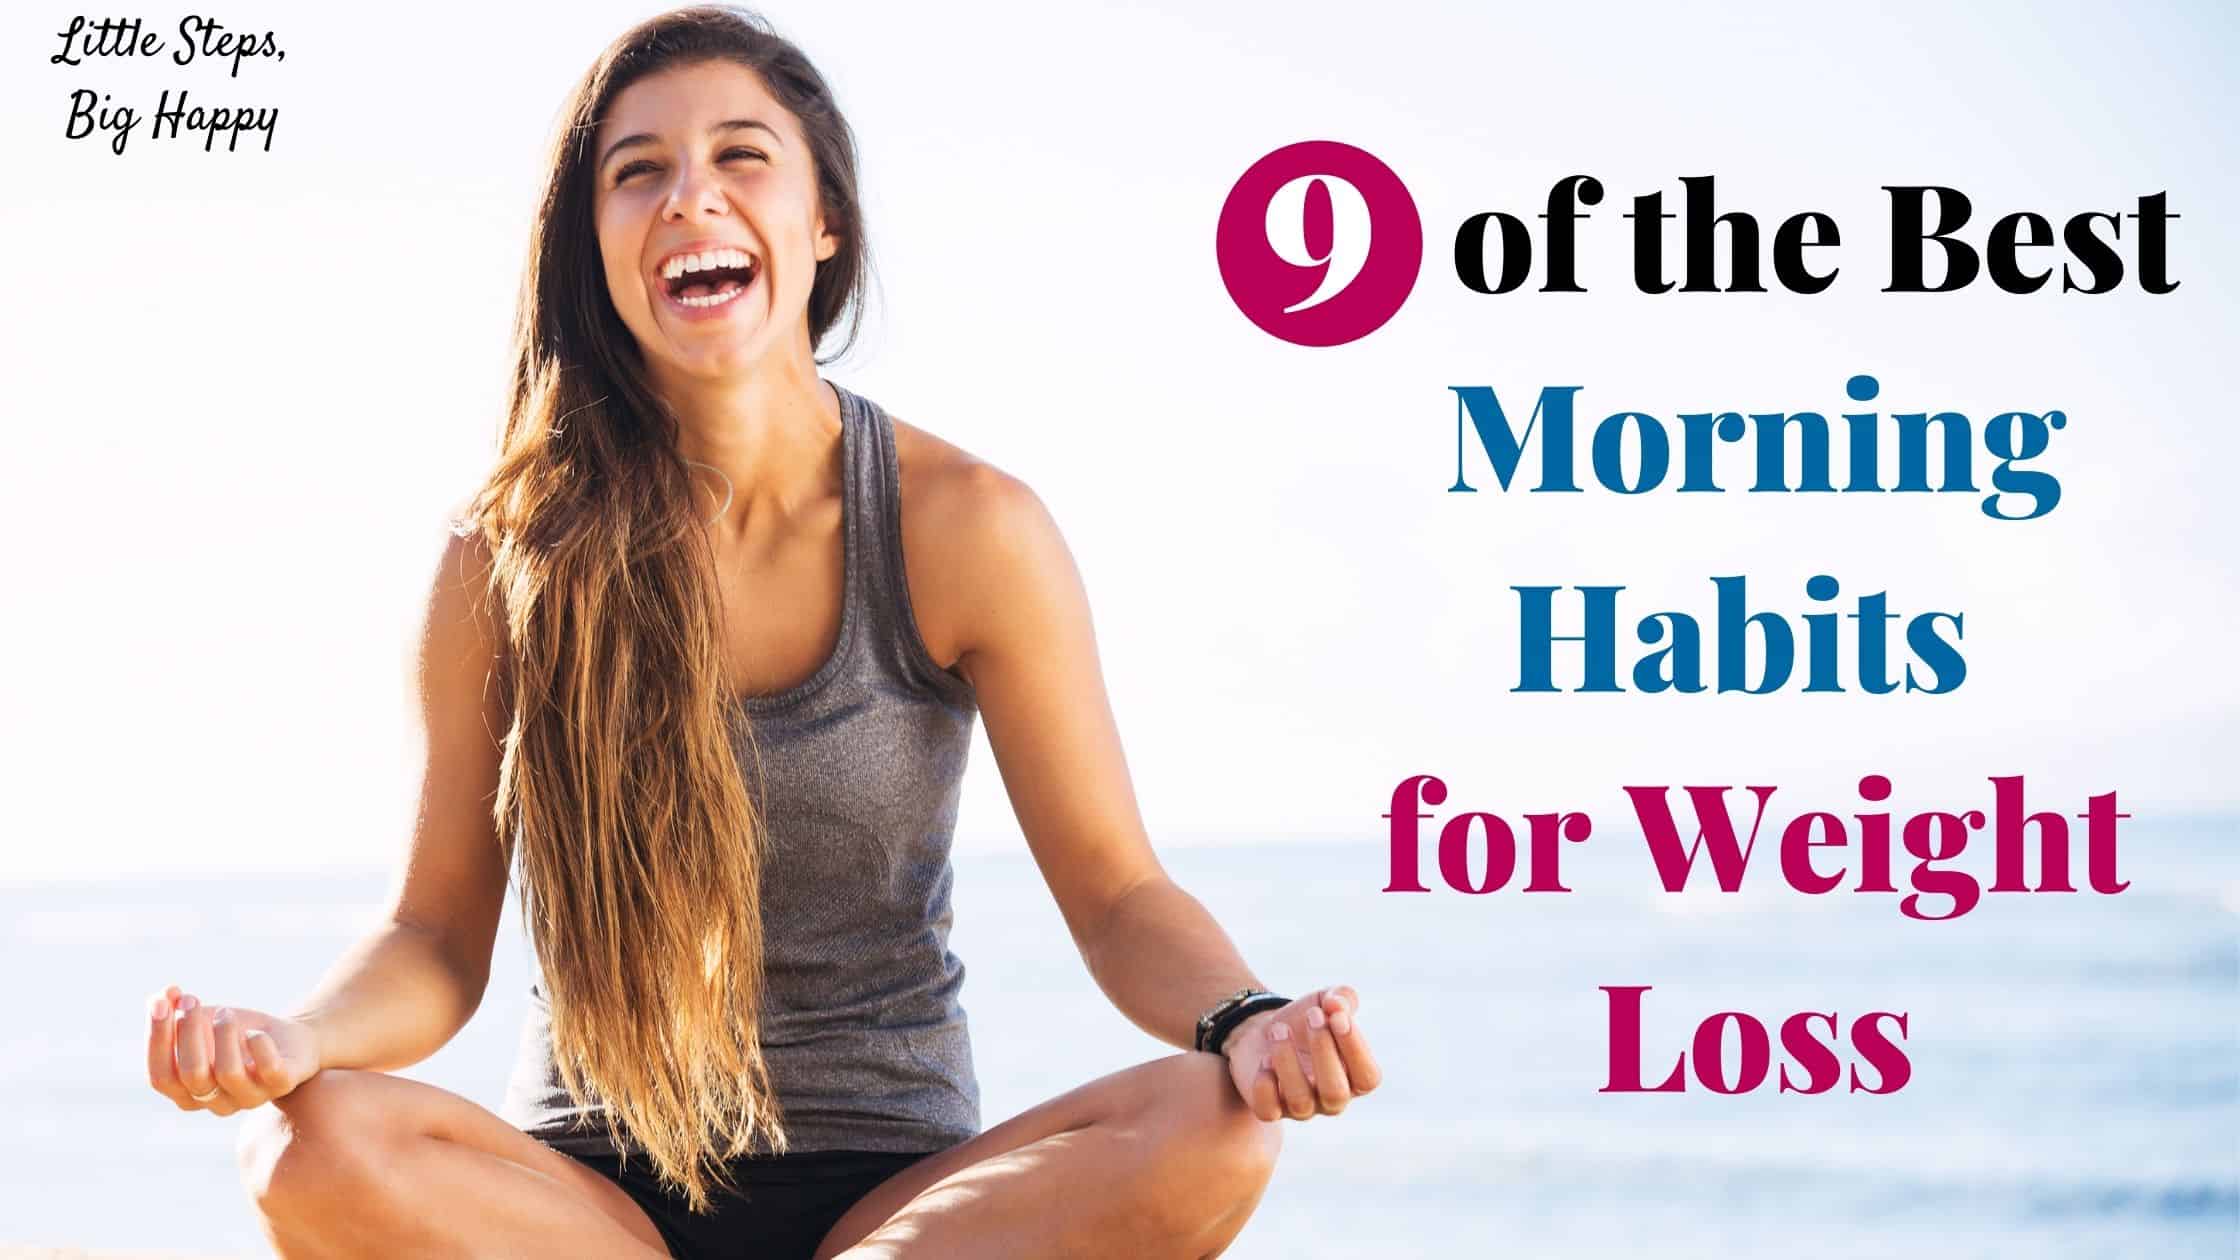 9 of the Best Morning Habits for Weight Loss